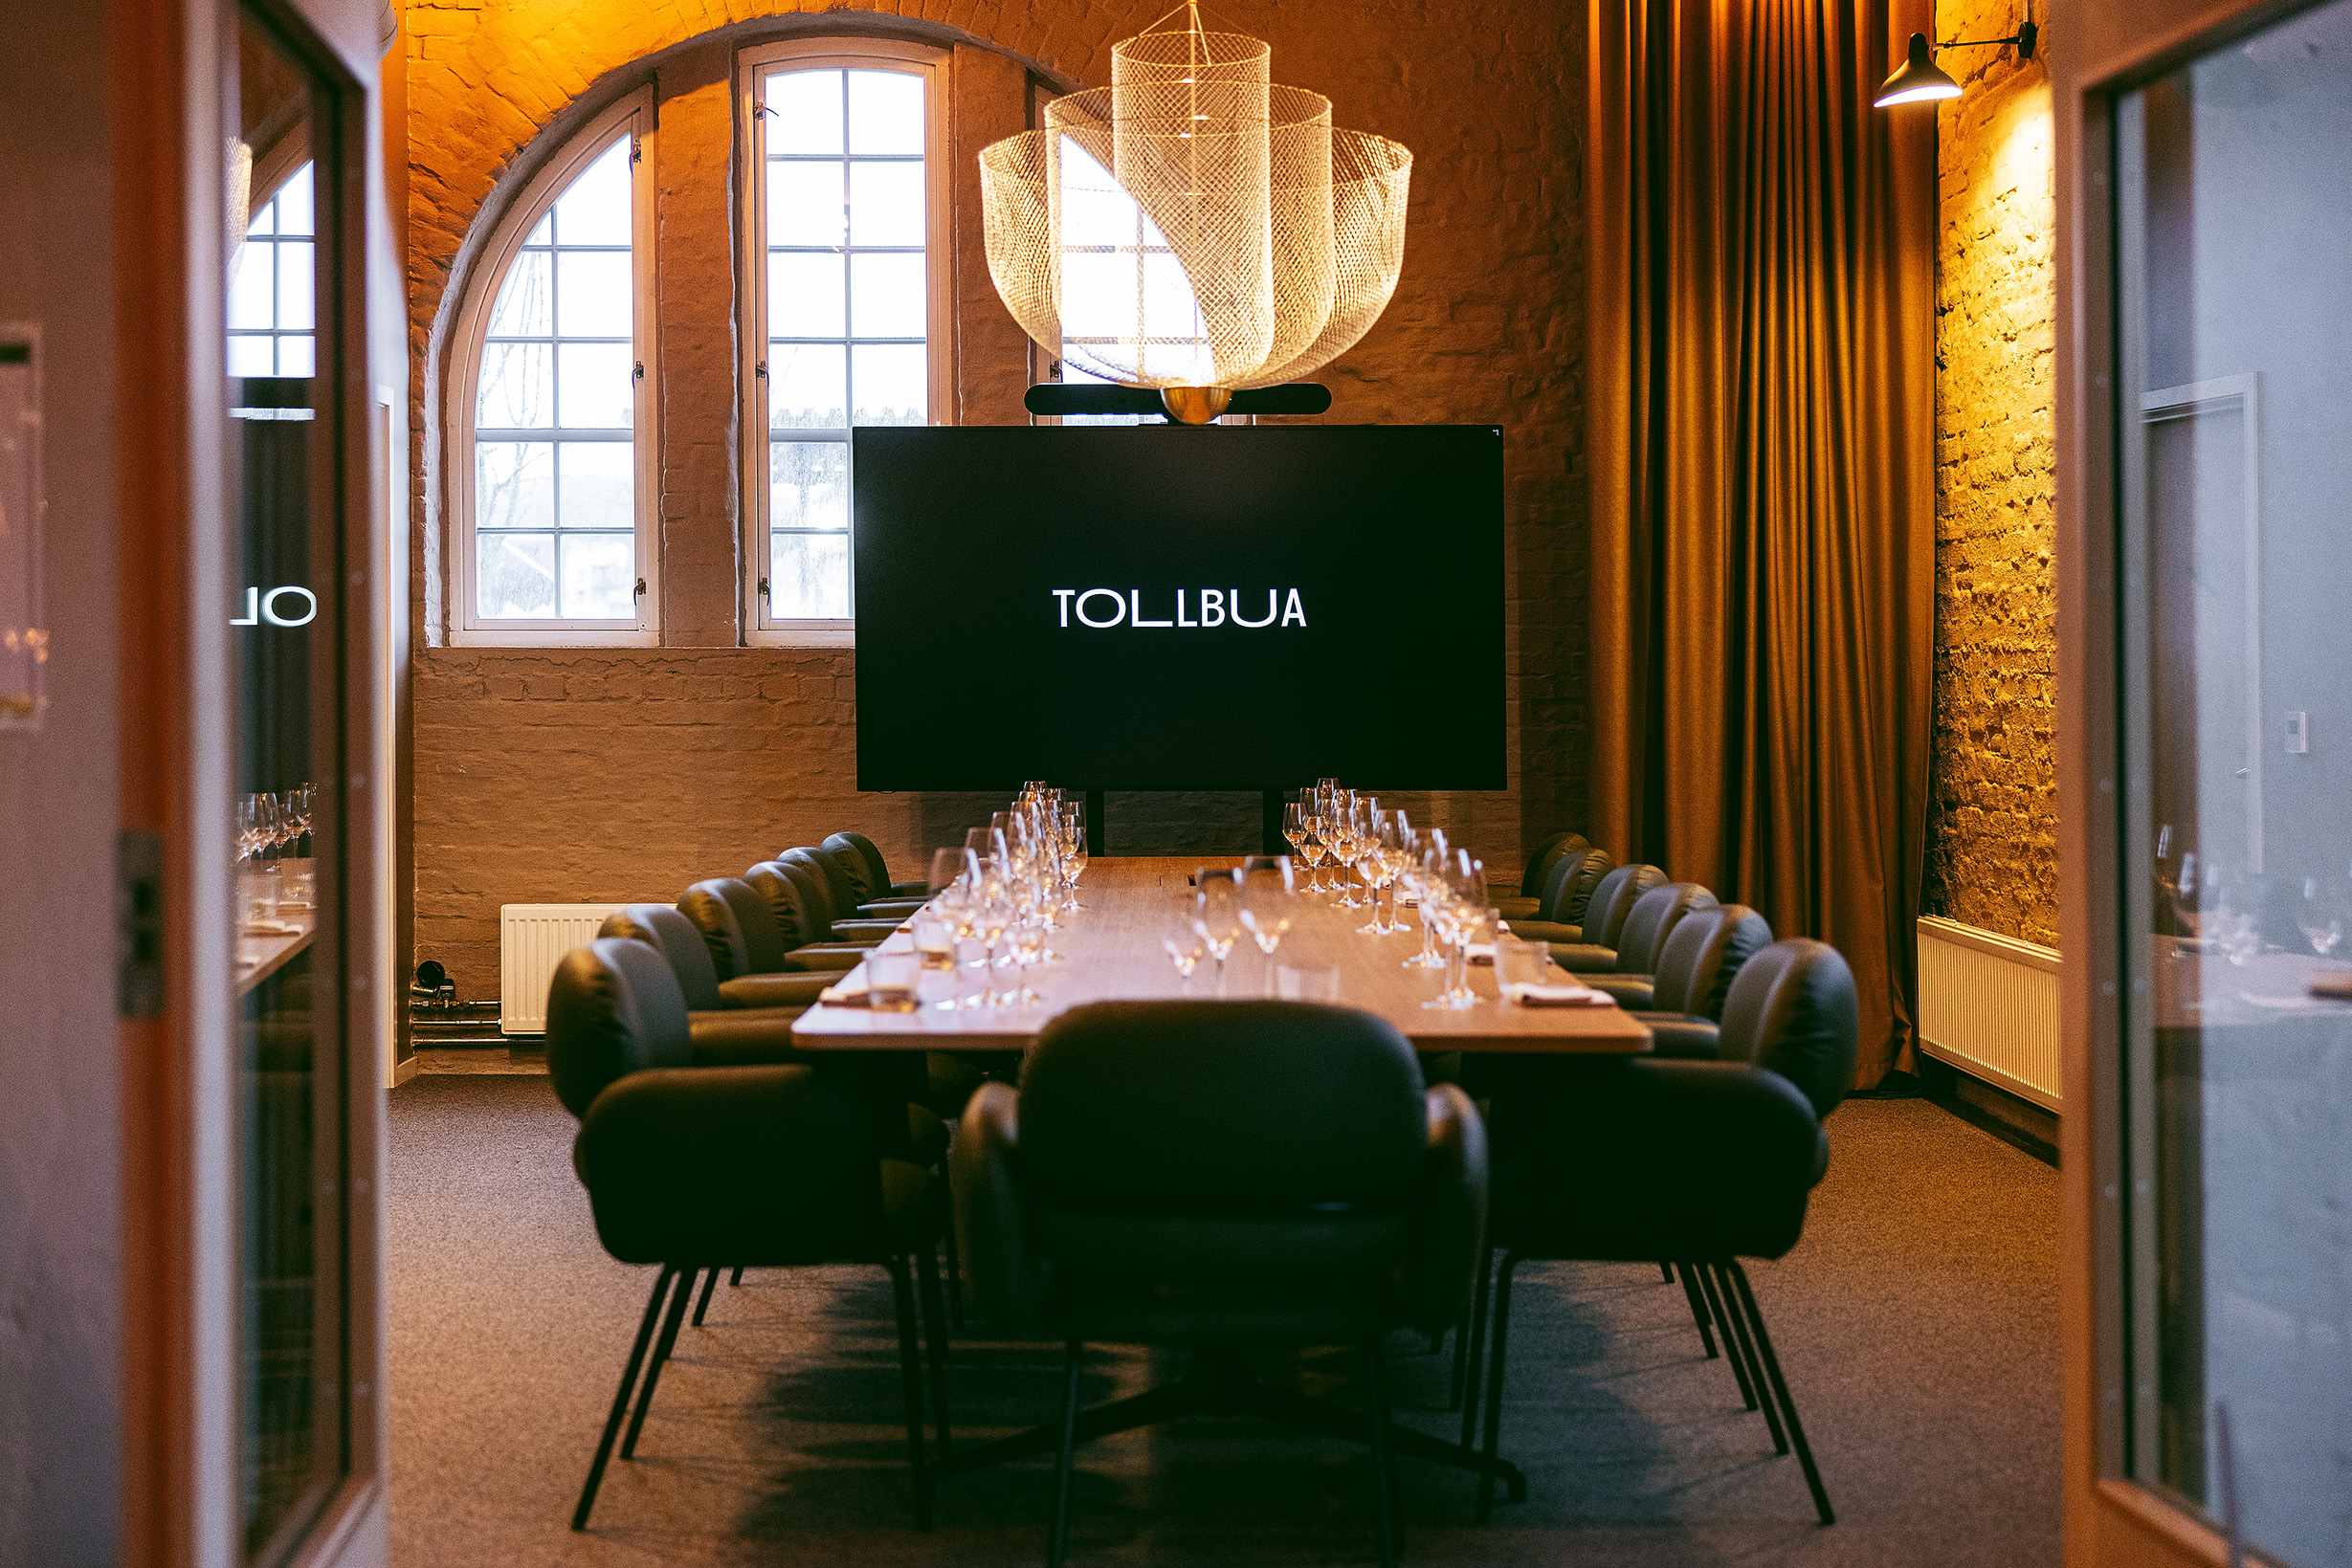 Tollbua's Chandelier Room is an exclusive private space, with windows on two sides and luxurious armchairs for up to 14 people.